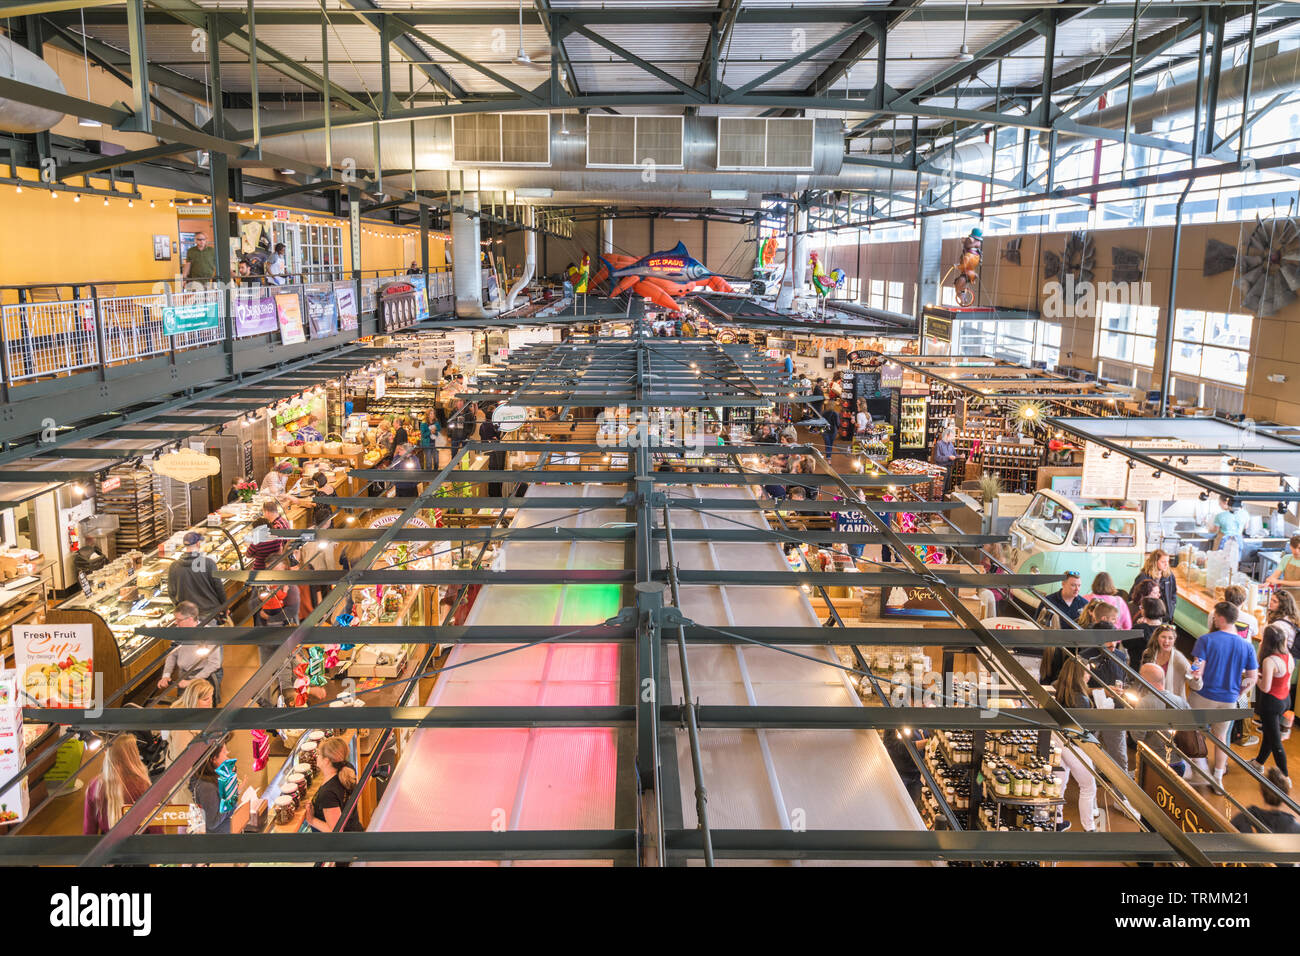 MIILWAUKEE, WISCONSIN - MAY 19, 2018: Shoppers in the interior of Milwaukee Public Market. The market opened in 2005. Stock Photo